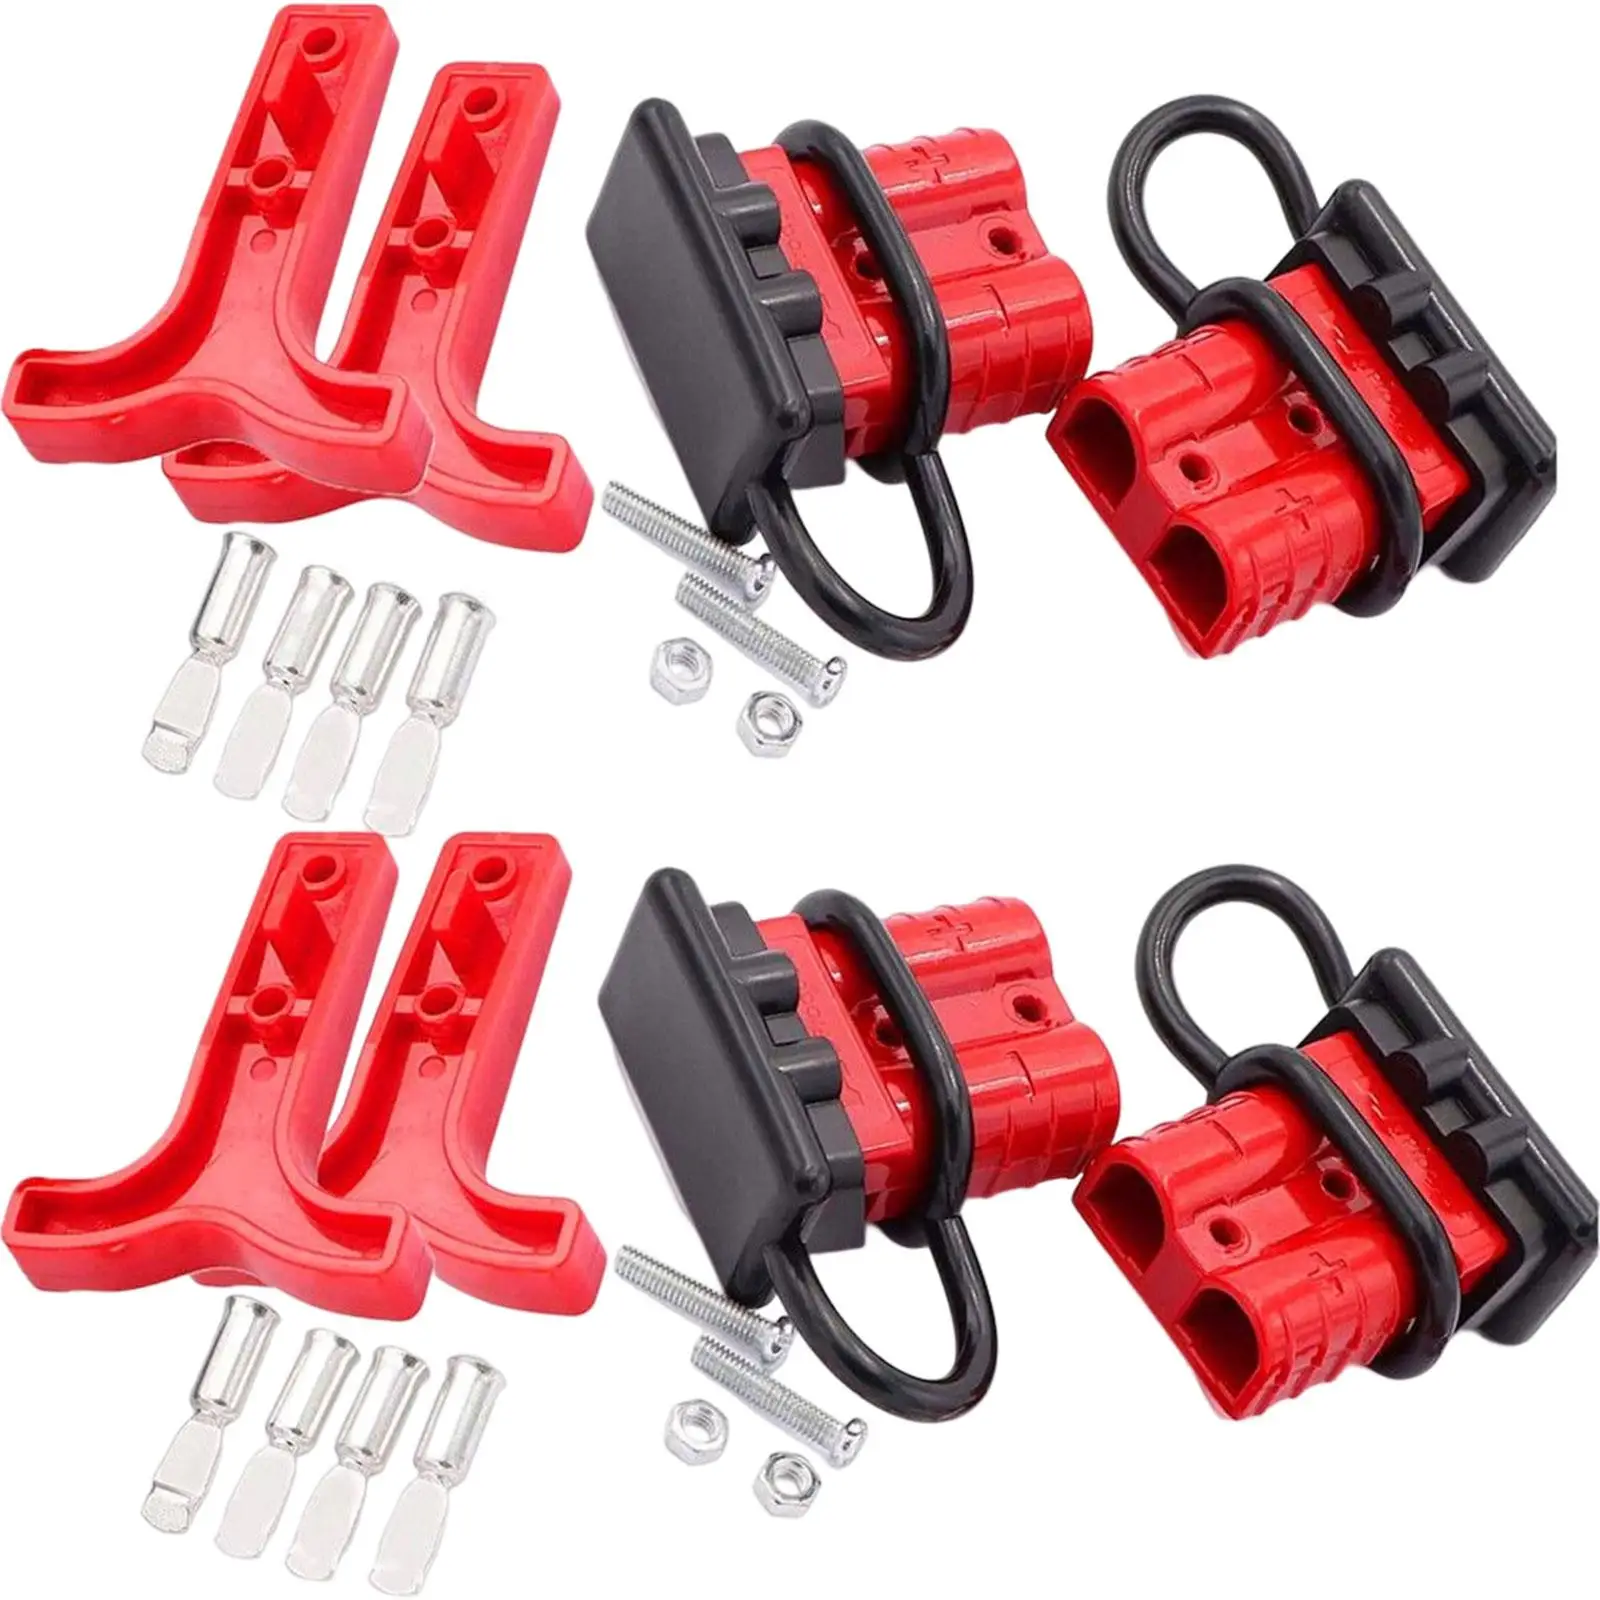 4x Battery Quick Connector Disconnector 50A Wire Connector for Bike Motor Recovery Winch Trailer